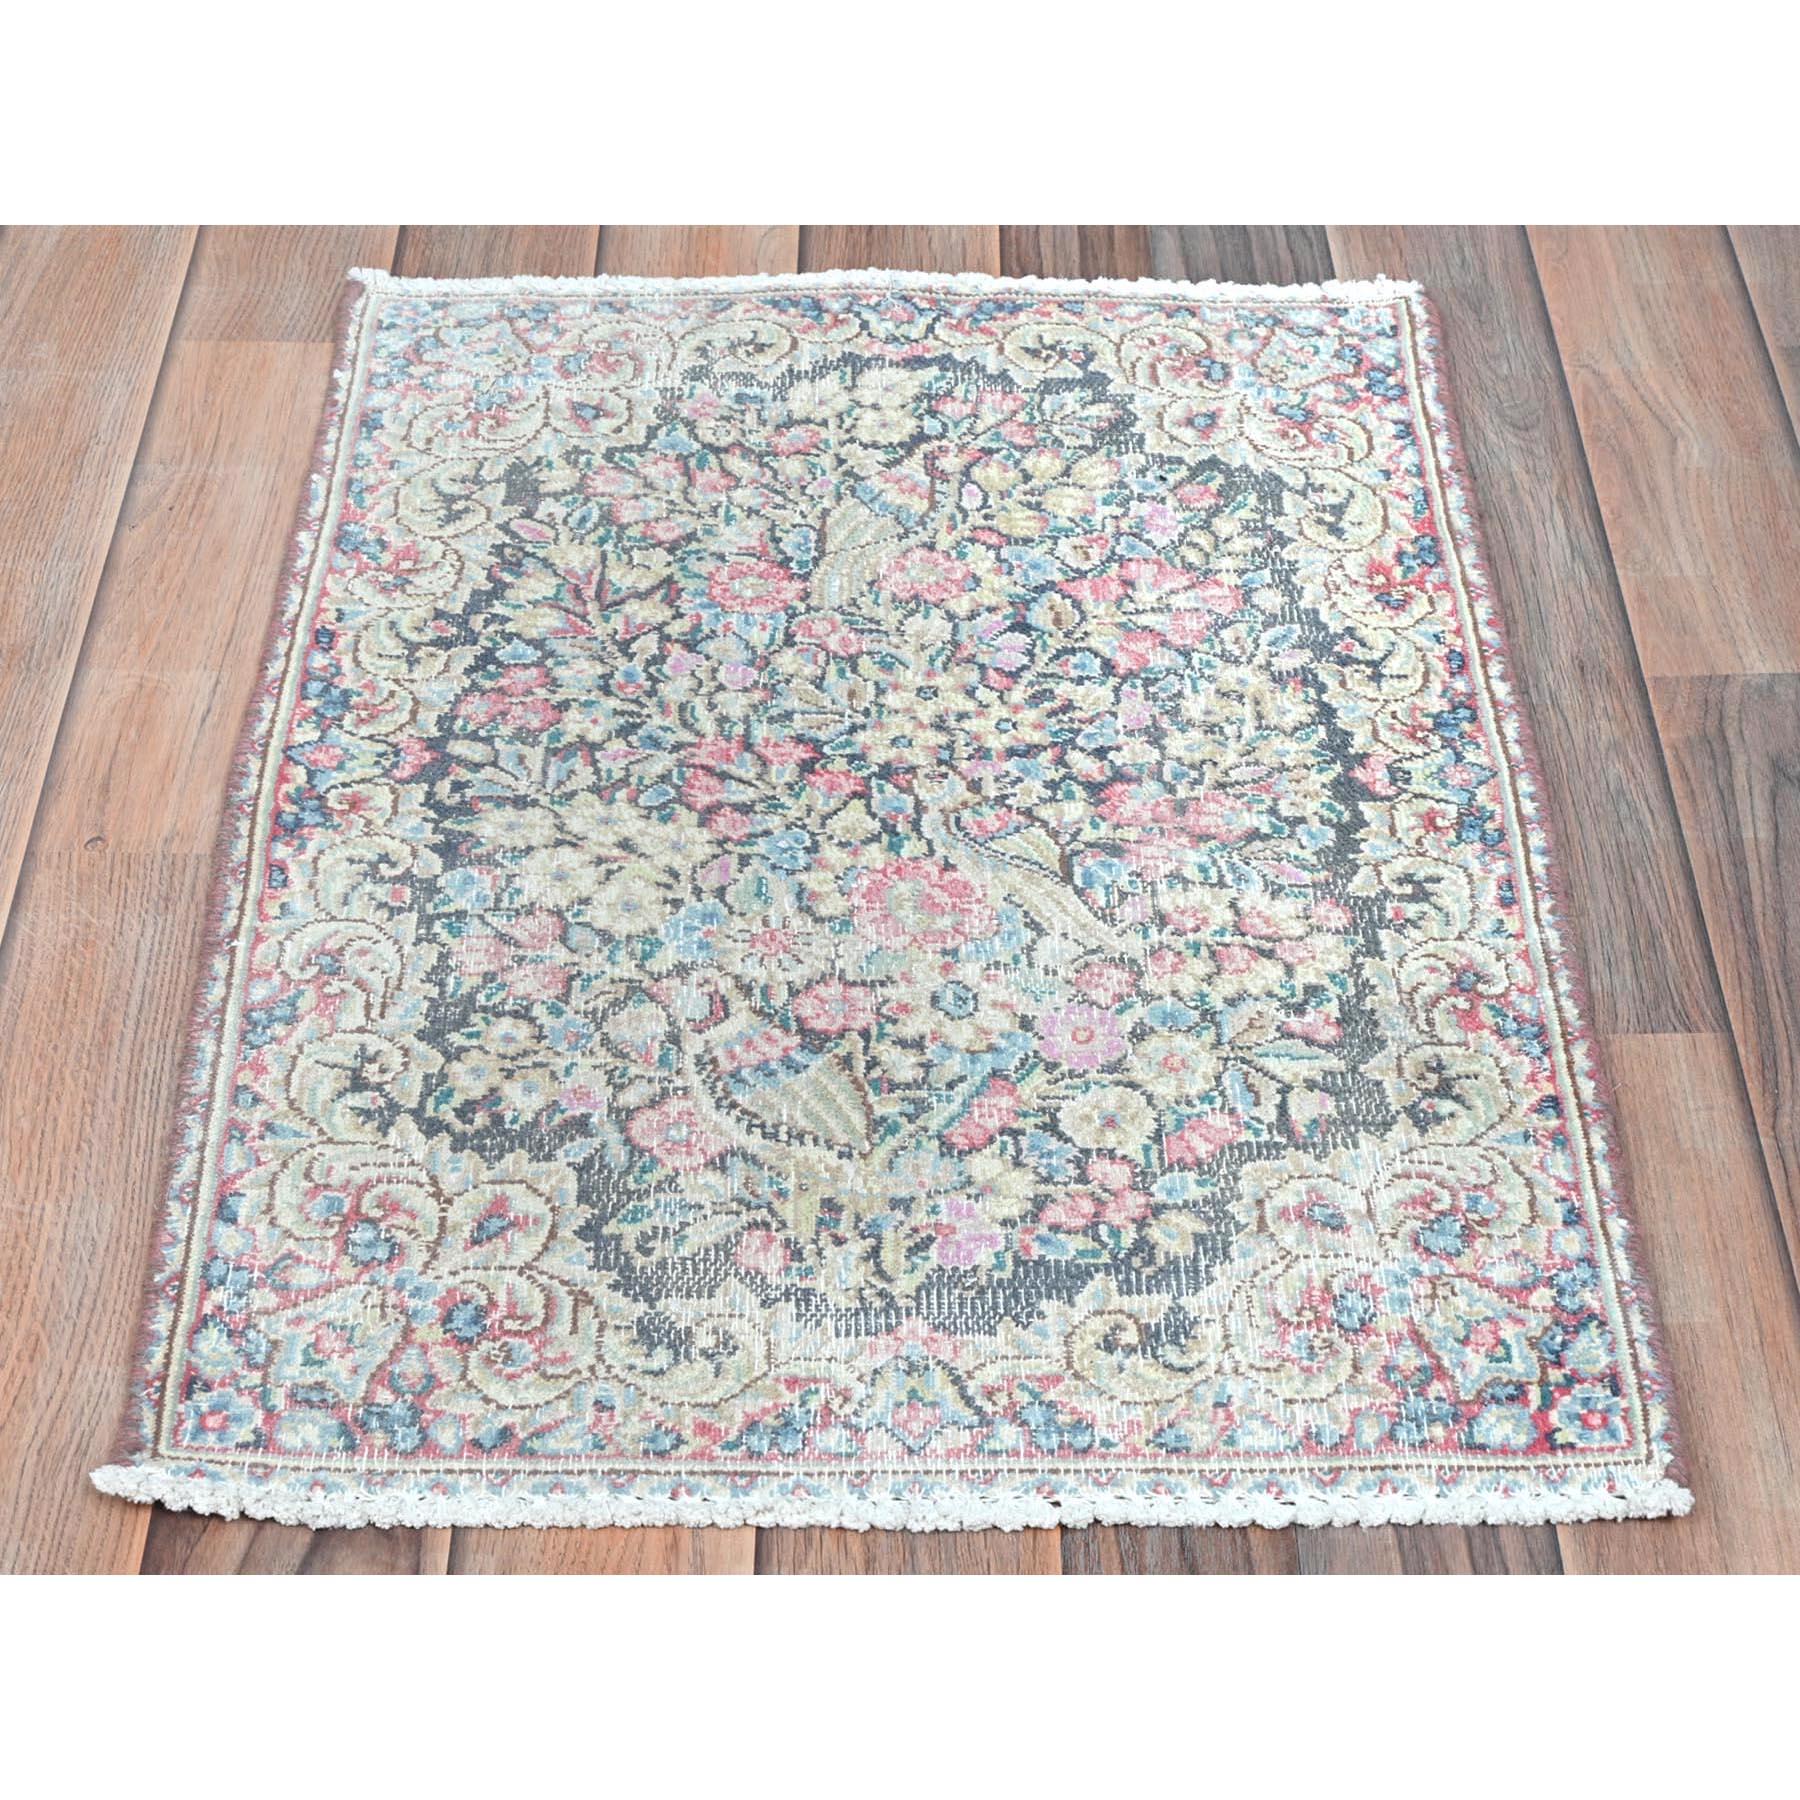 This fabulous Hand-Knotted carpet has been created and designed for extra strength and durability. This rug has been handcrafted for weeks in the traditional method that is used to make
Exact Rug Size in Feet and Inches : 1'8